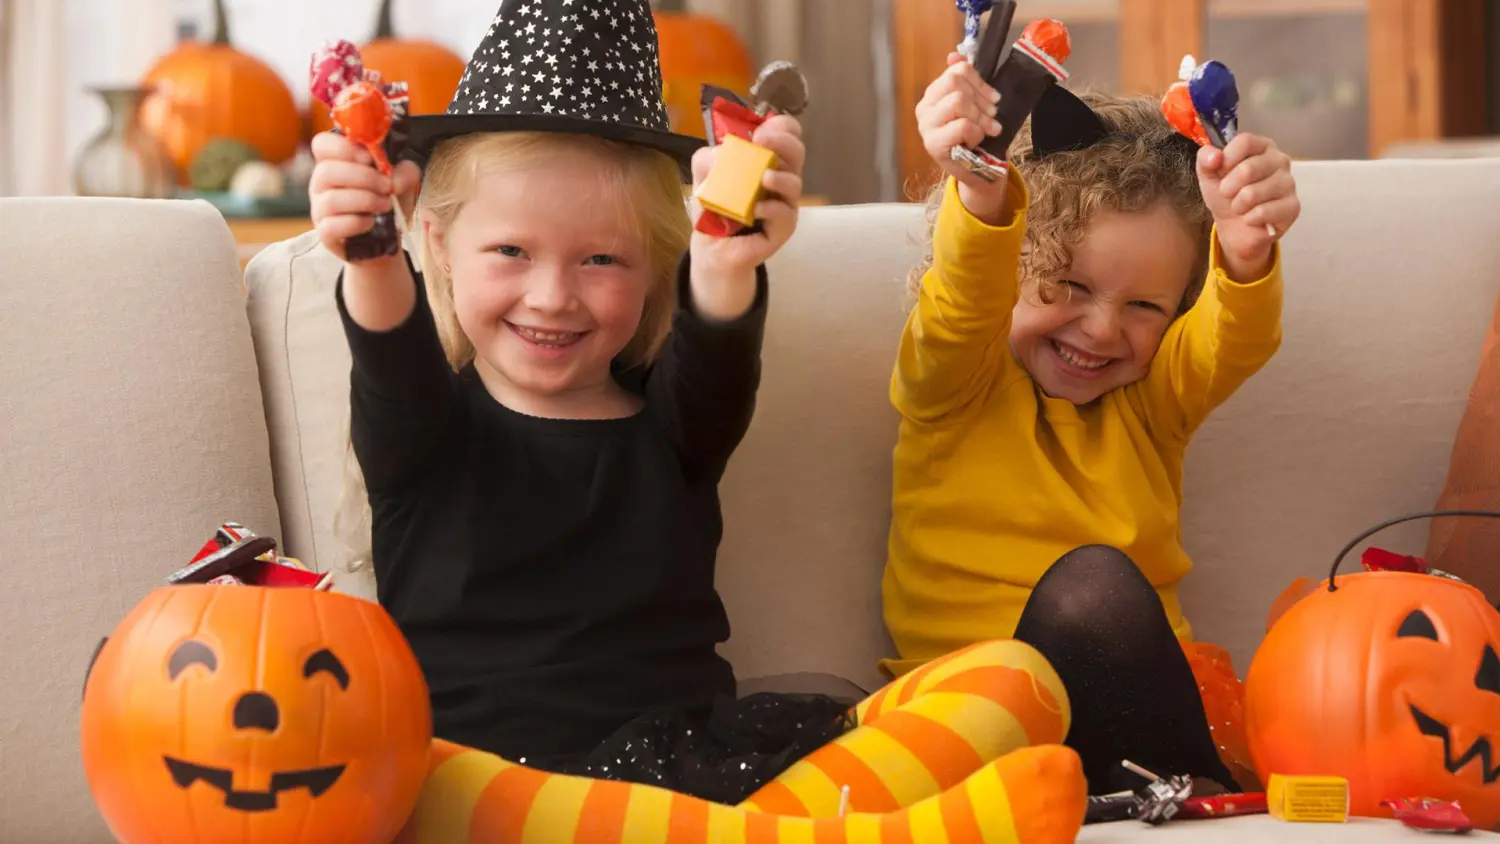 Should parents let their children with ADHD have Halloween candy?